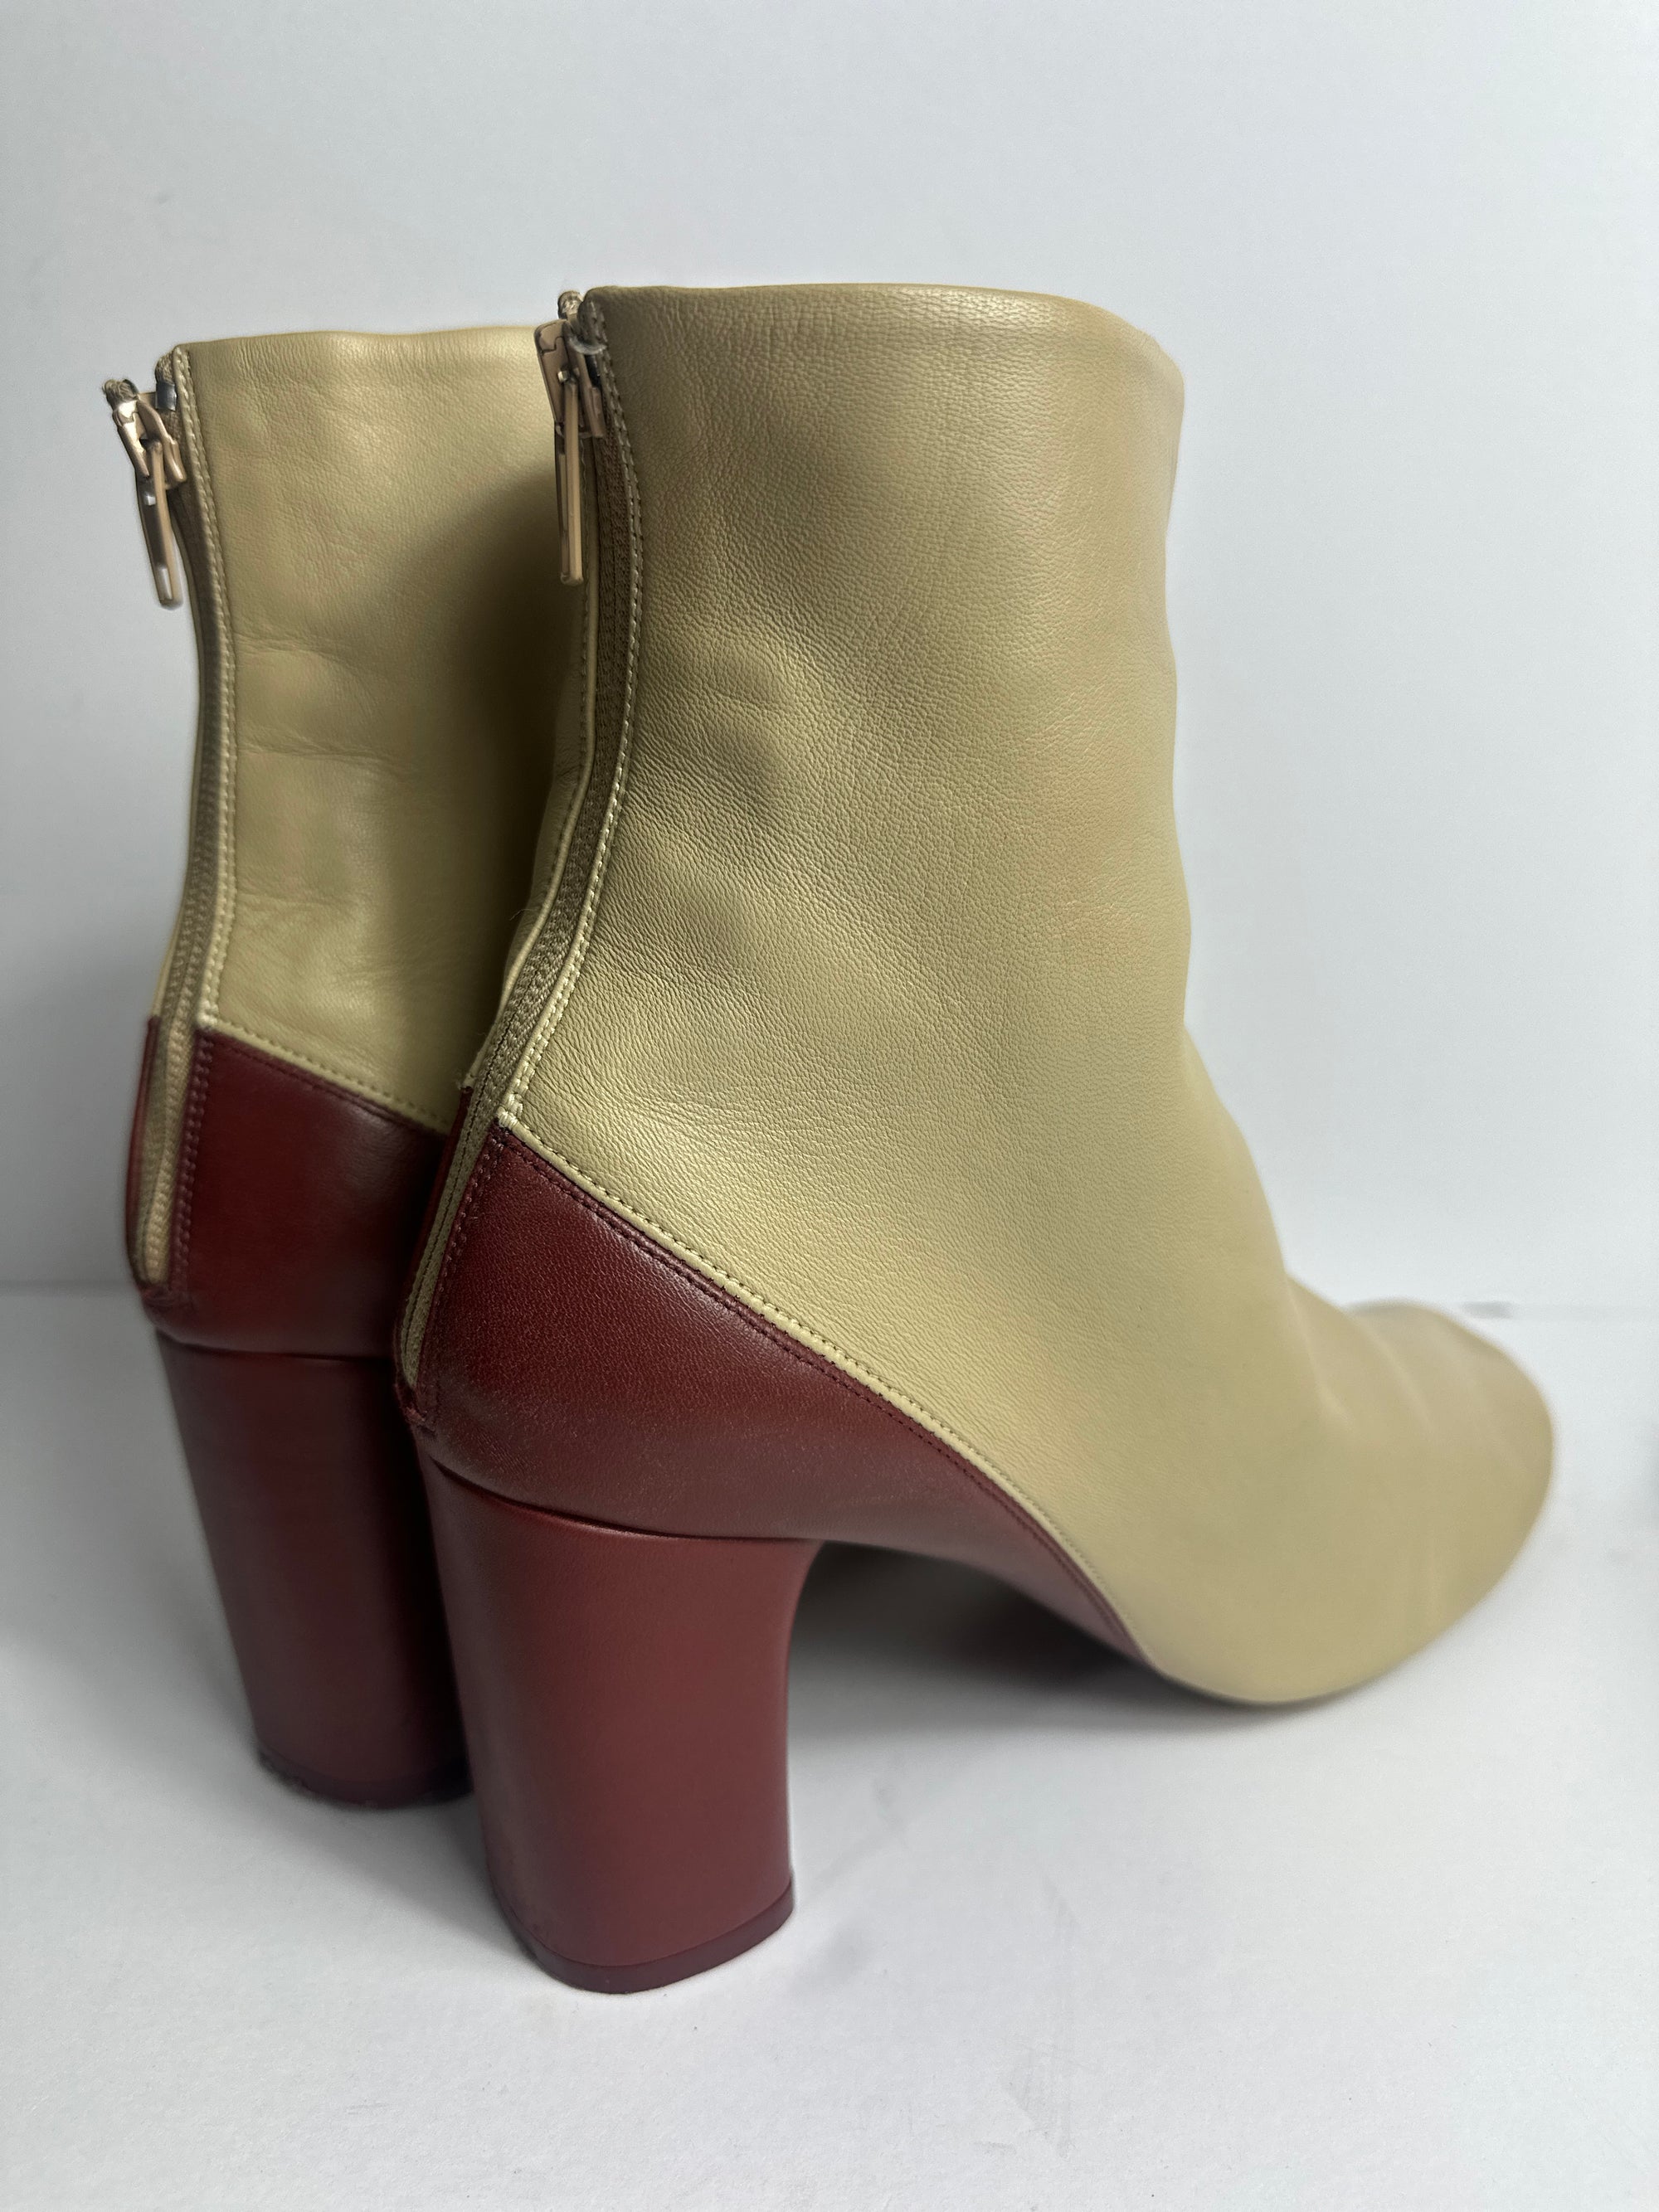 Celine Ankle Boots